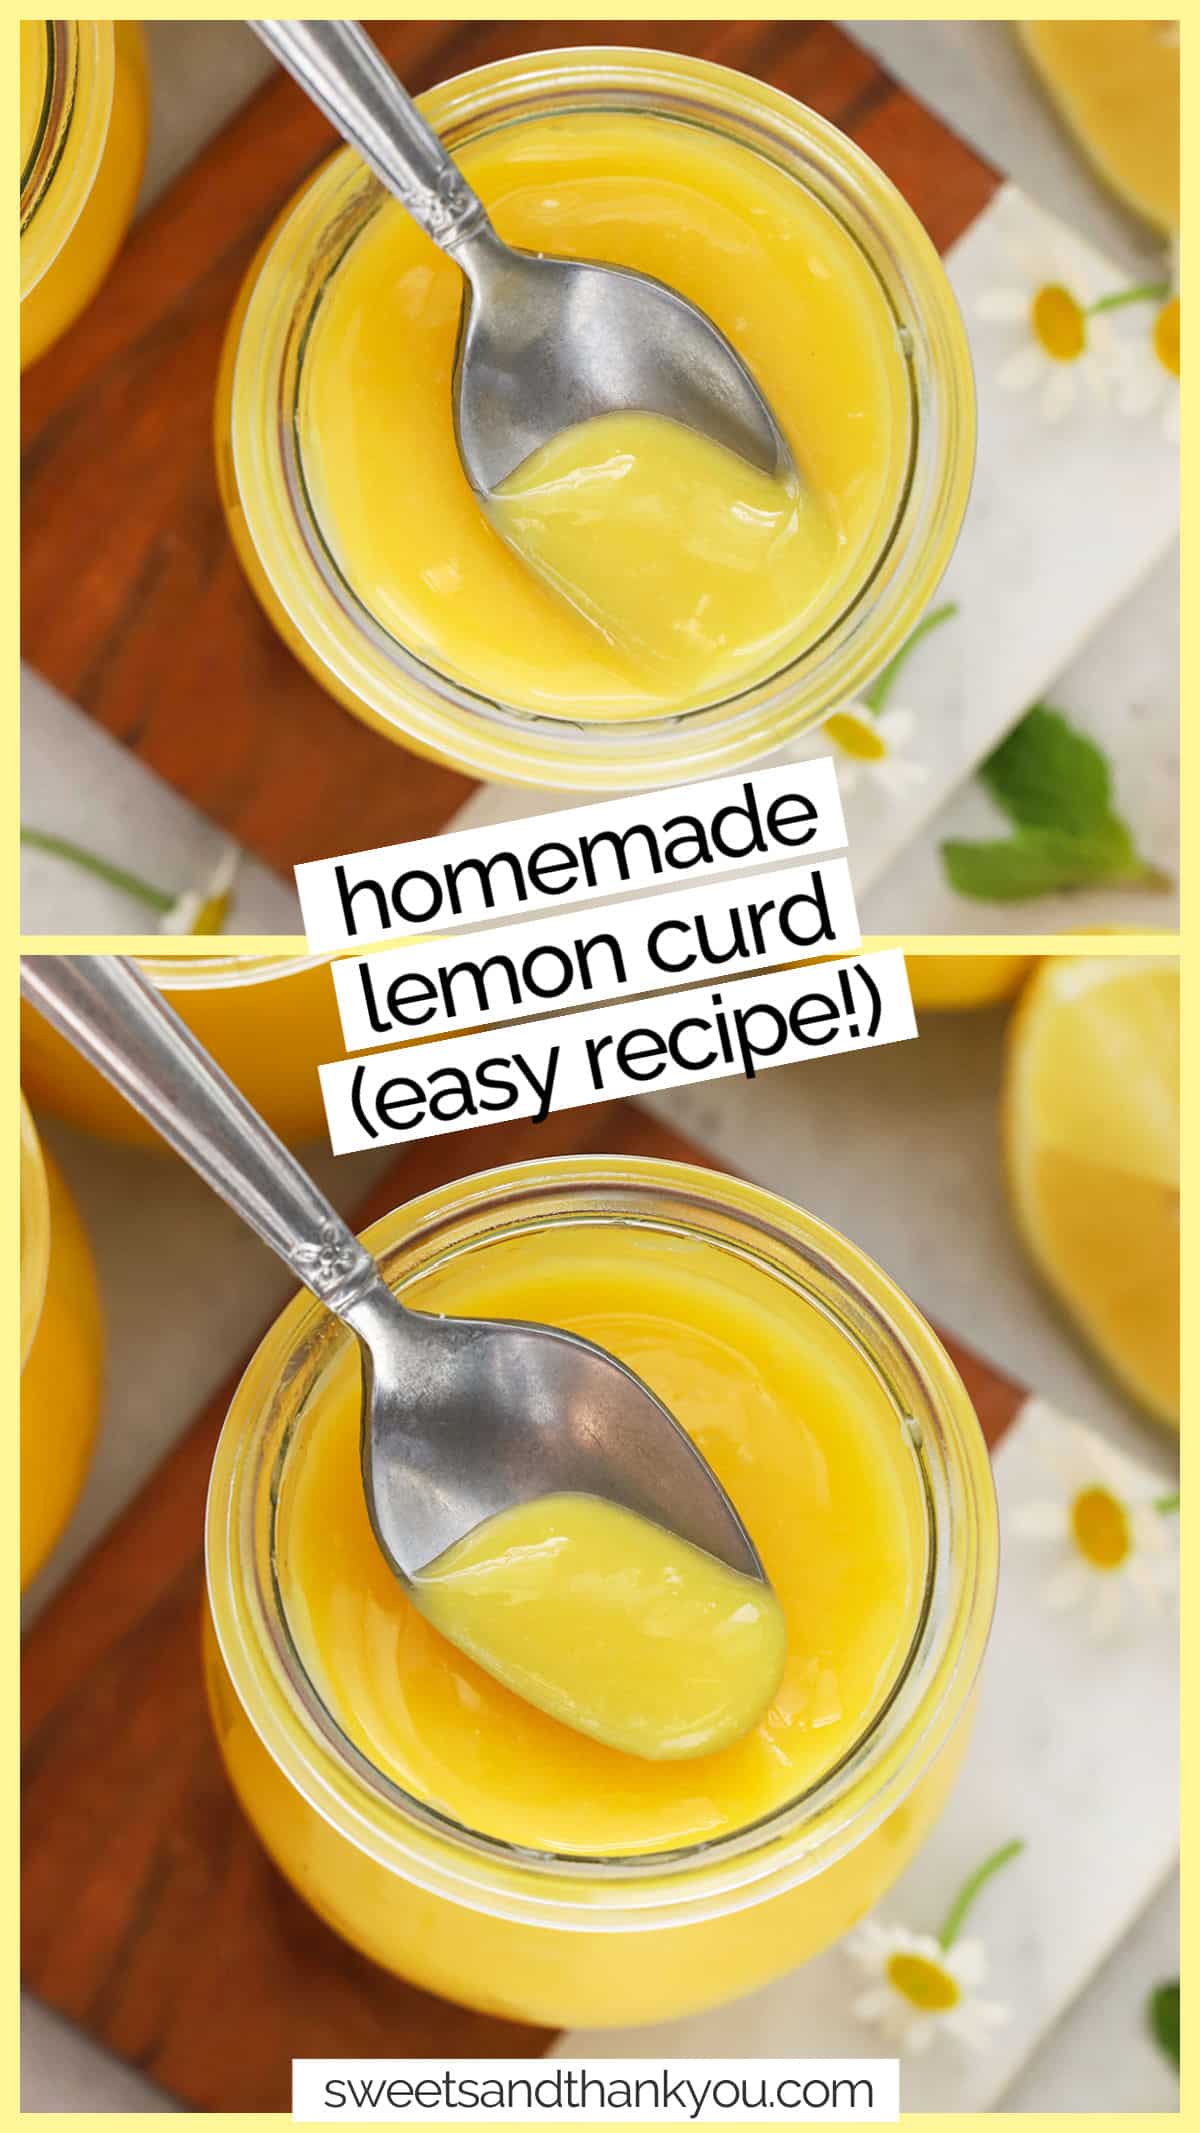 Our easy homemade lemon curd recipe tastes like sunshine! It's surprisingly simple to make (with just 5 ingredients!) and it adds zesty lemon flavor to cheesecake, scones, and all kinds of delicious desserts. In our post, you'll learn how to make lemon curd from scratch, how to store lemon curd, and 12+ delicious ways to use it.